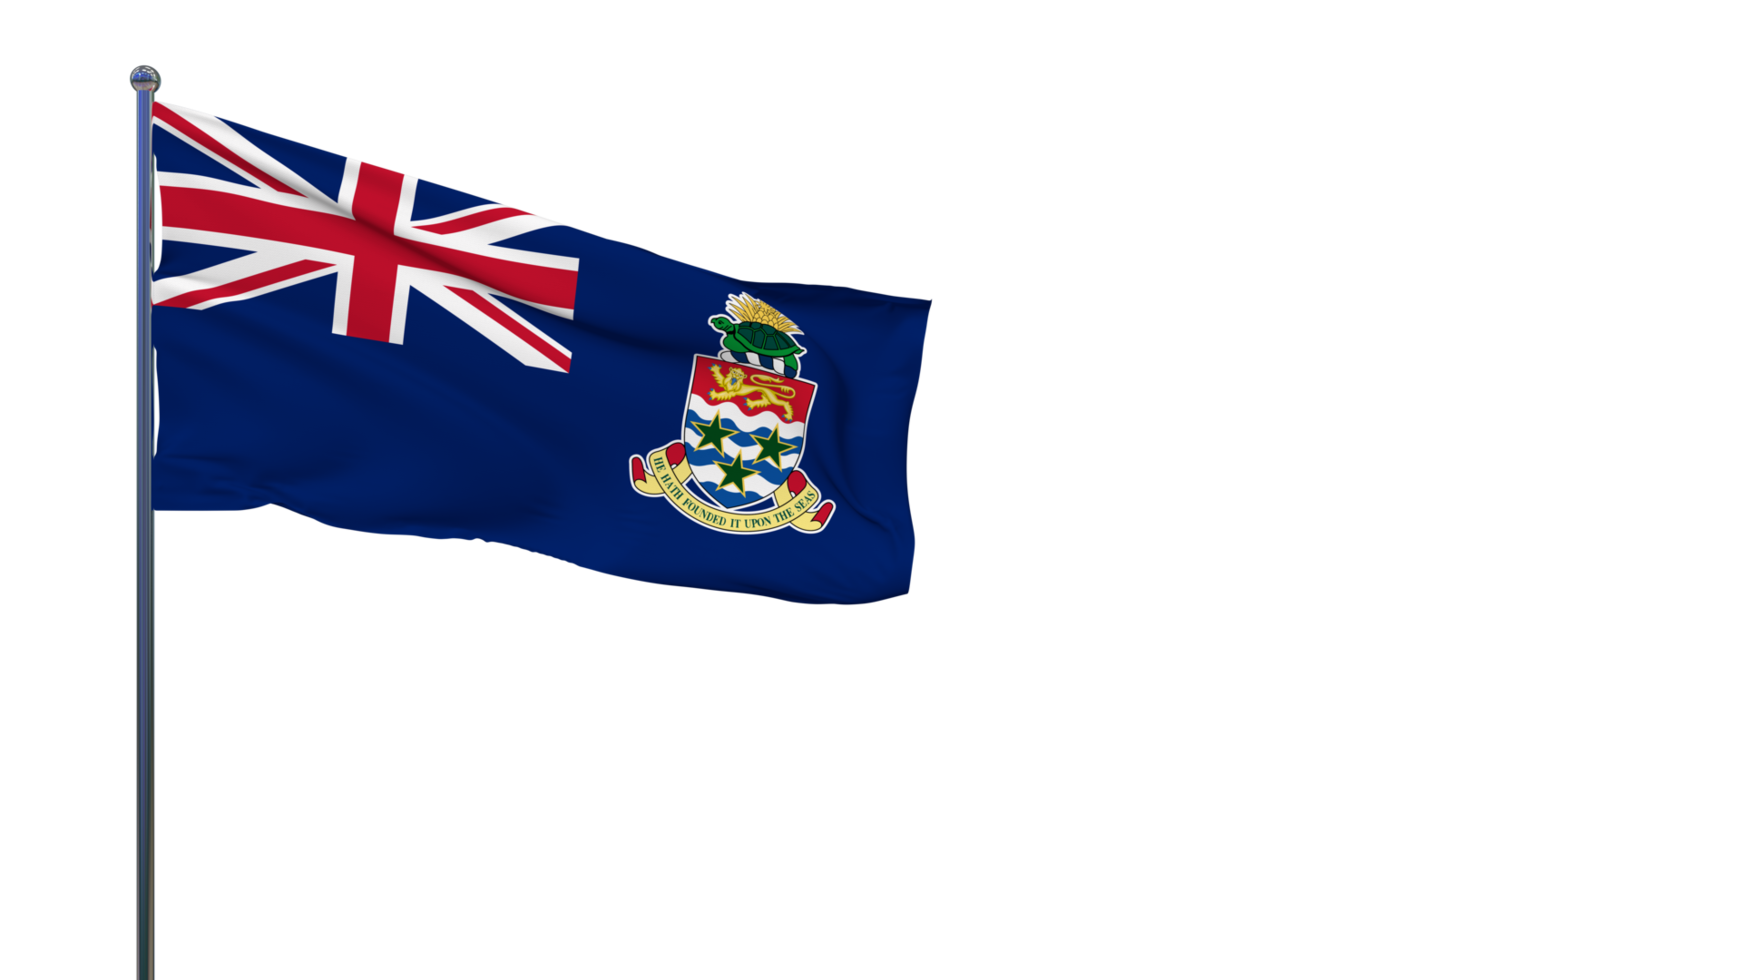 Cayman Islands Flag Waving in The Wind 3D Rendering, National Day, Independence Day png